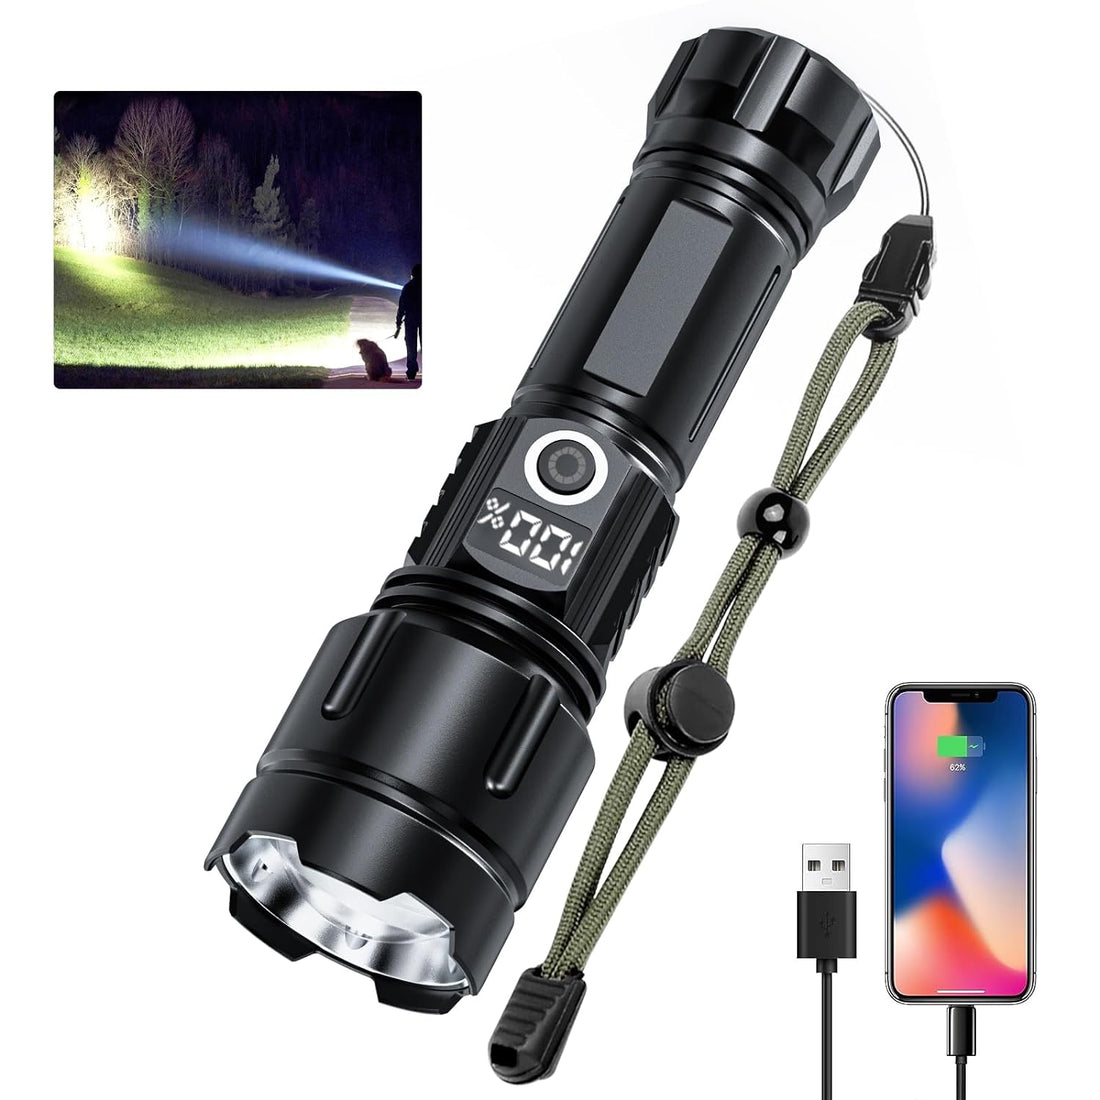 iToncs Rechargeable LED Flashlight High Lumens, High Powered 20000 Lumen Super Bright Flashlights with 5 Modes, IPX4 Waterproof, Portable Handheld Flash Light for Home, Emergency, Outdoor